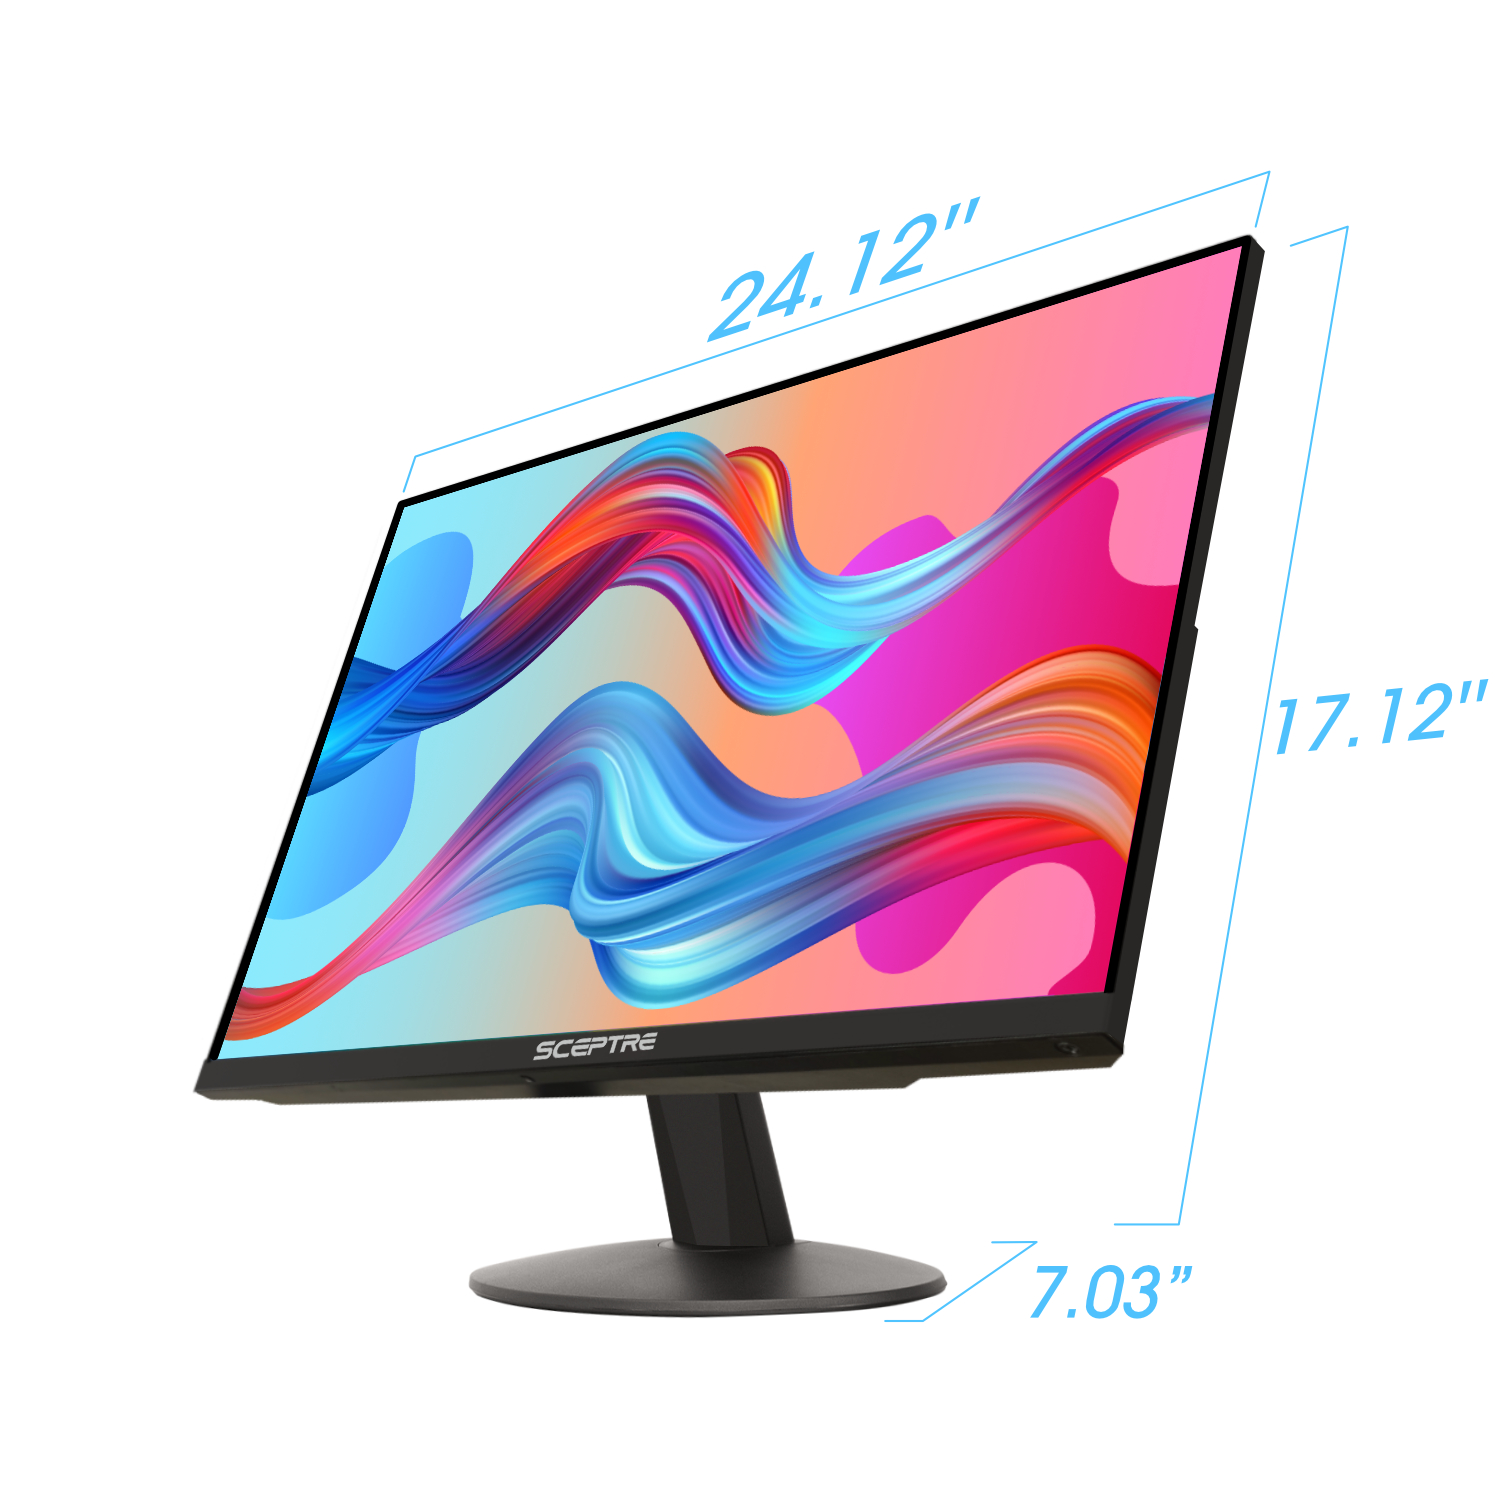 Sceptre IPS 27-inch Computer Monitor 1080p 75Hz HDMI Built-in Speakers, Machine Black (E275W-FPT) - image 5 of 7